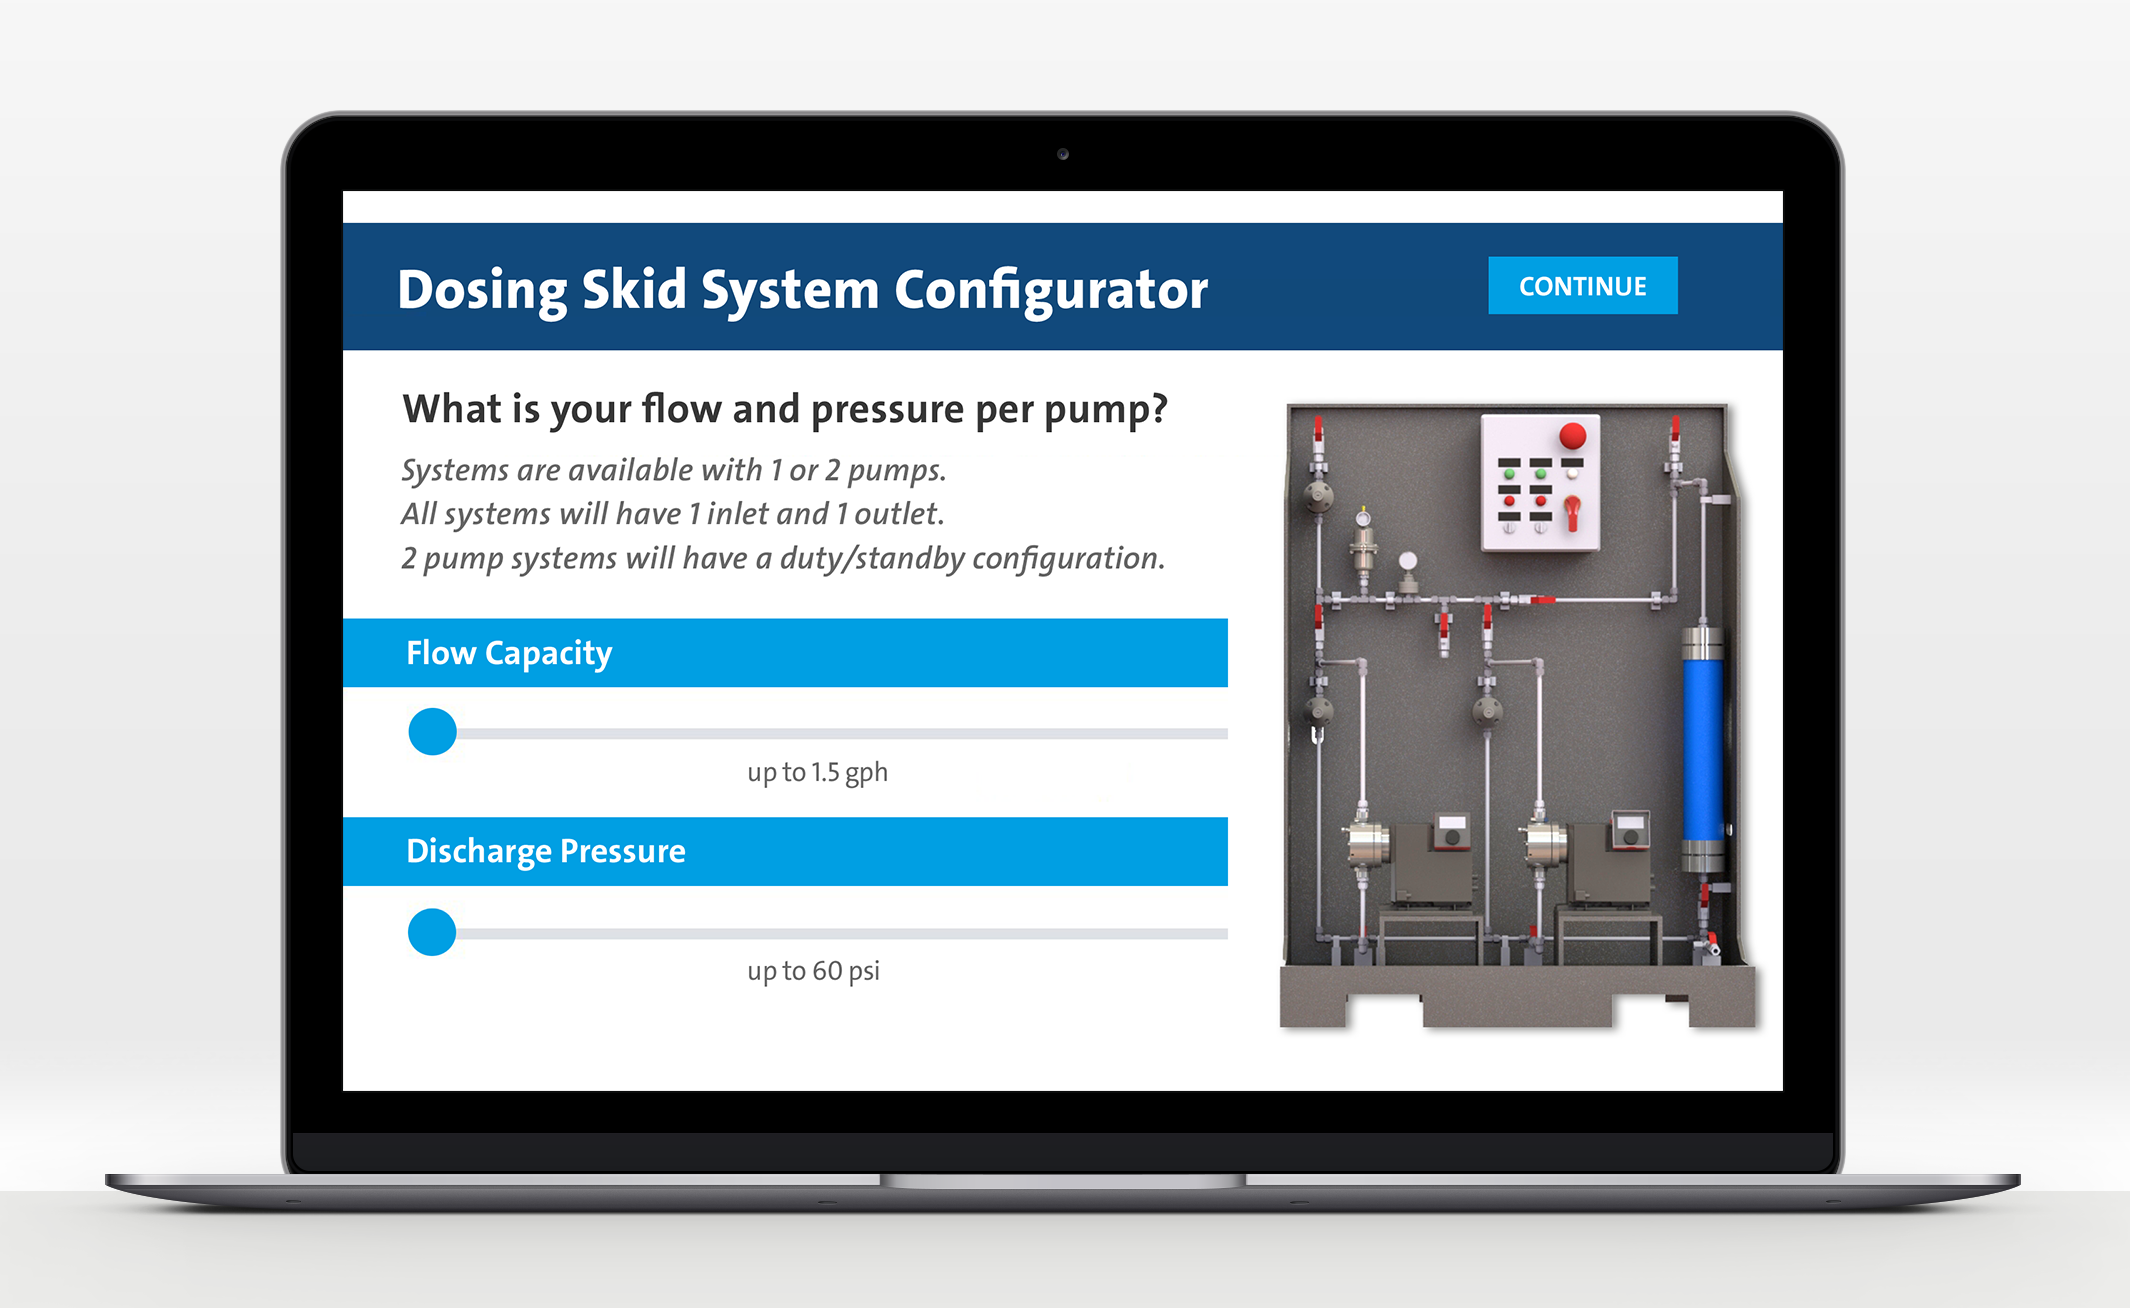 The Dosing Skid Configurator generates an interactive 3D model of a pre-engineered dosing skid system.